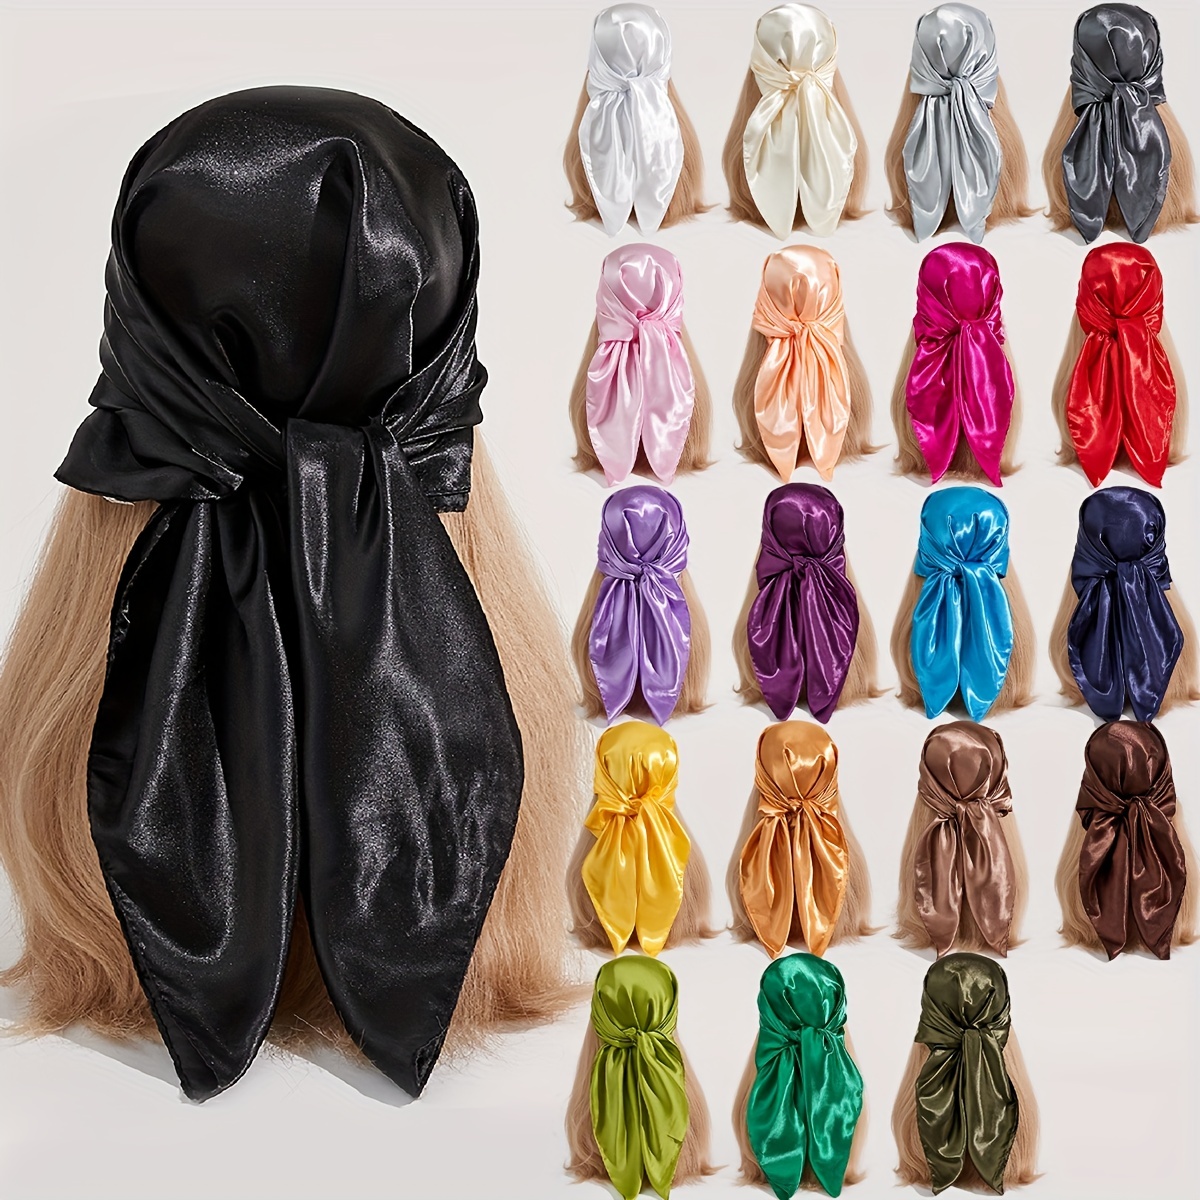 1pc 70cm Silk-like Satin Scarf For Women, Can Be Worn As A Neck Scarf,  Headband, Headscarf, Hair Decoration, Ideal For Vacation Or Everyday Use